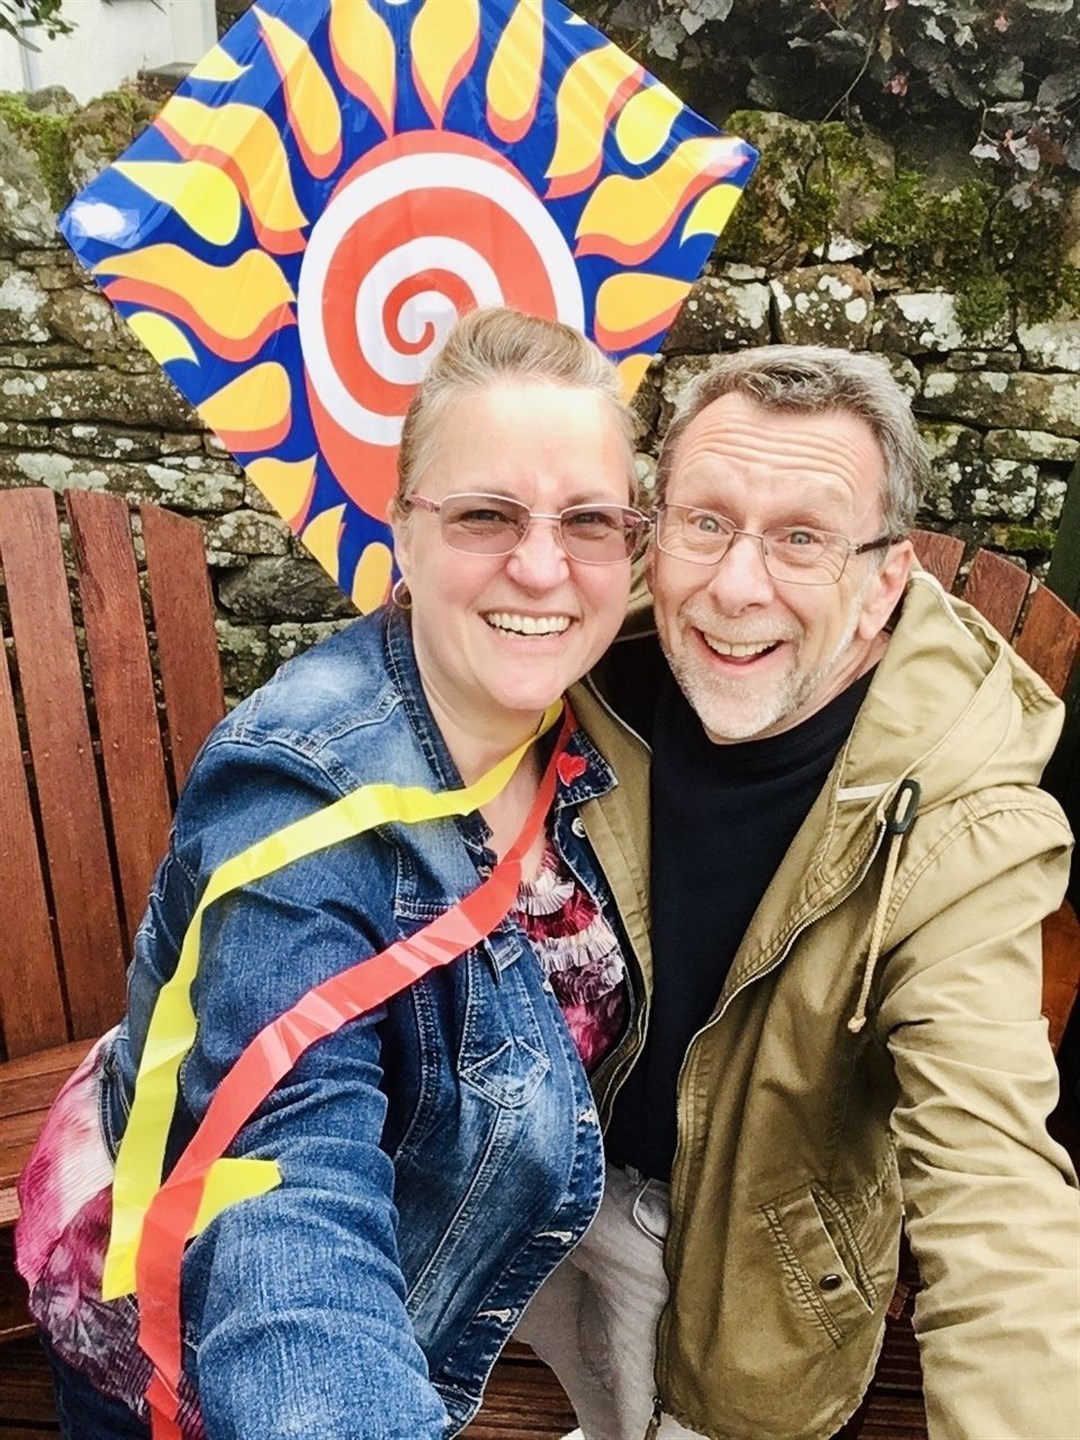 Michael and Tina Hook have been working with Dornoch and District Community Fellowship and the Free Church to run children's events in the town.